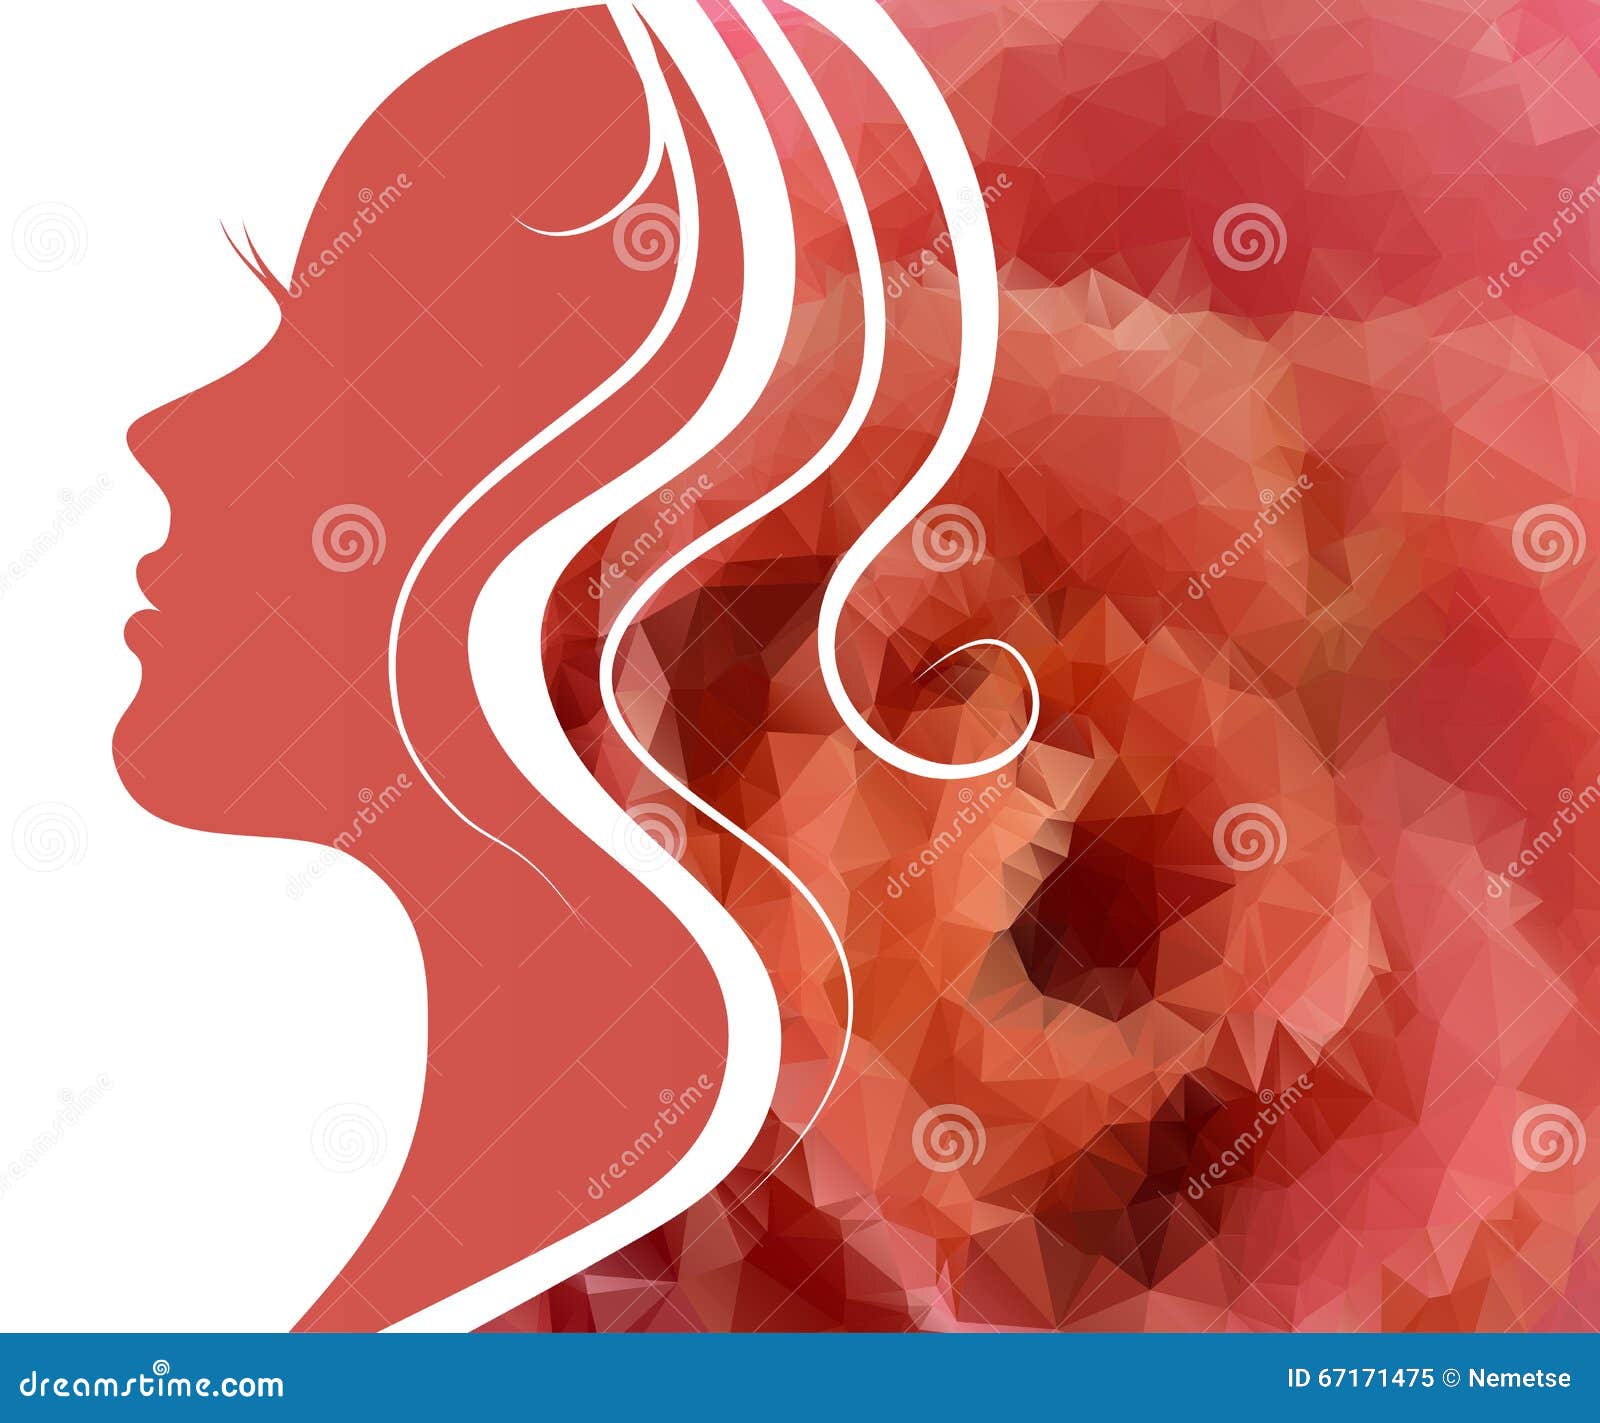 Woman S Silhouette With Beautiful Hair Stock Vector - Illustration of ...